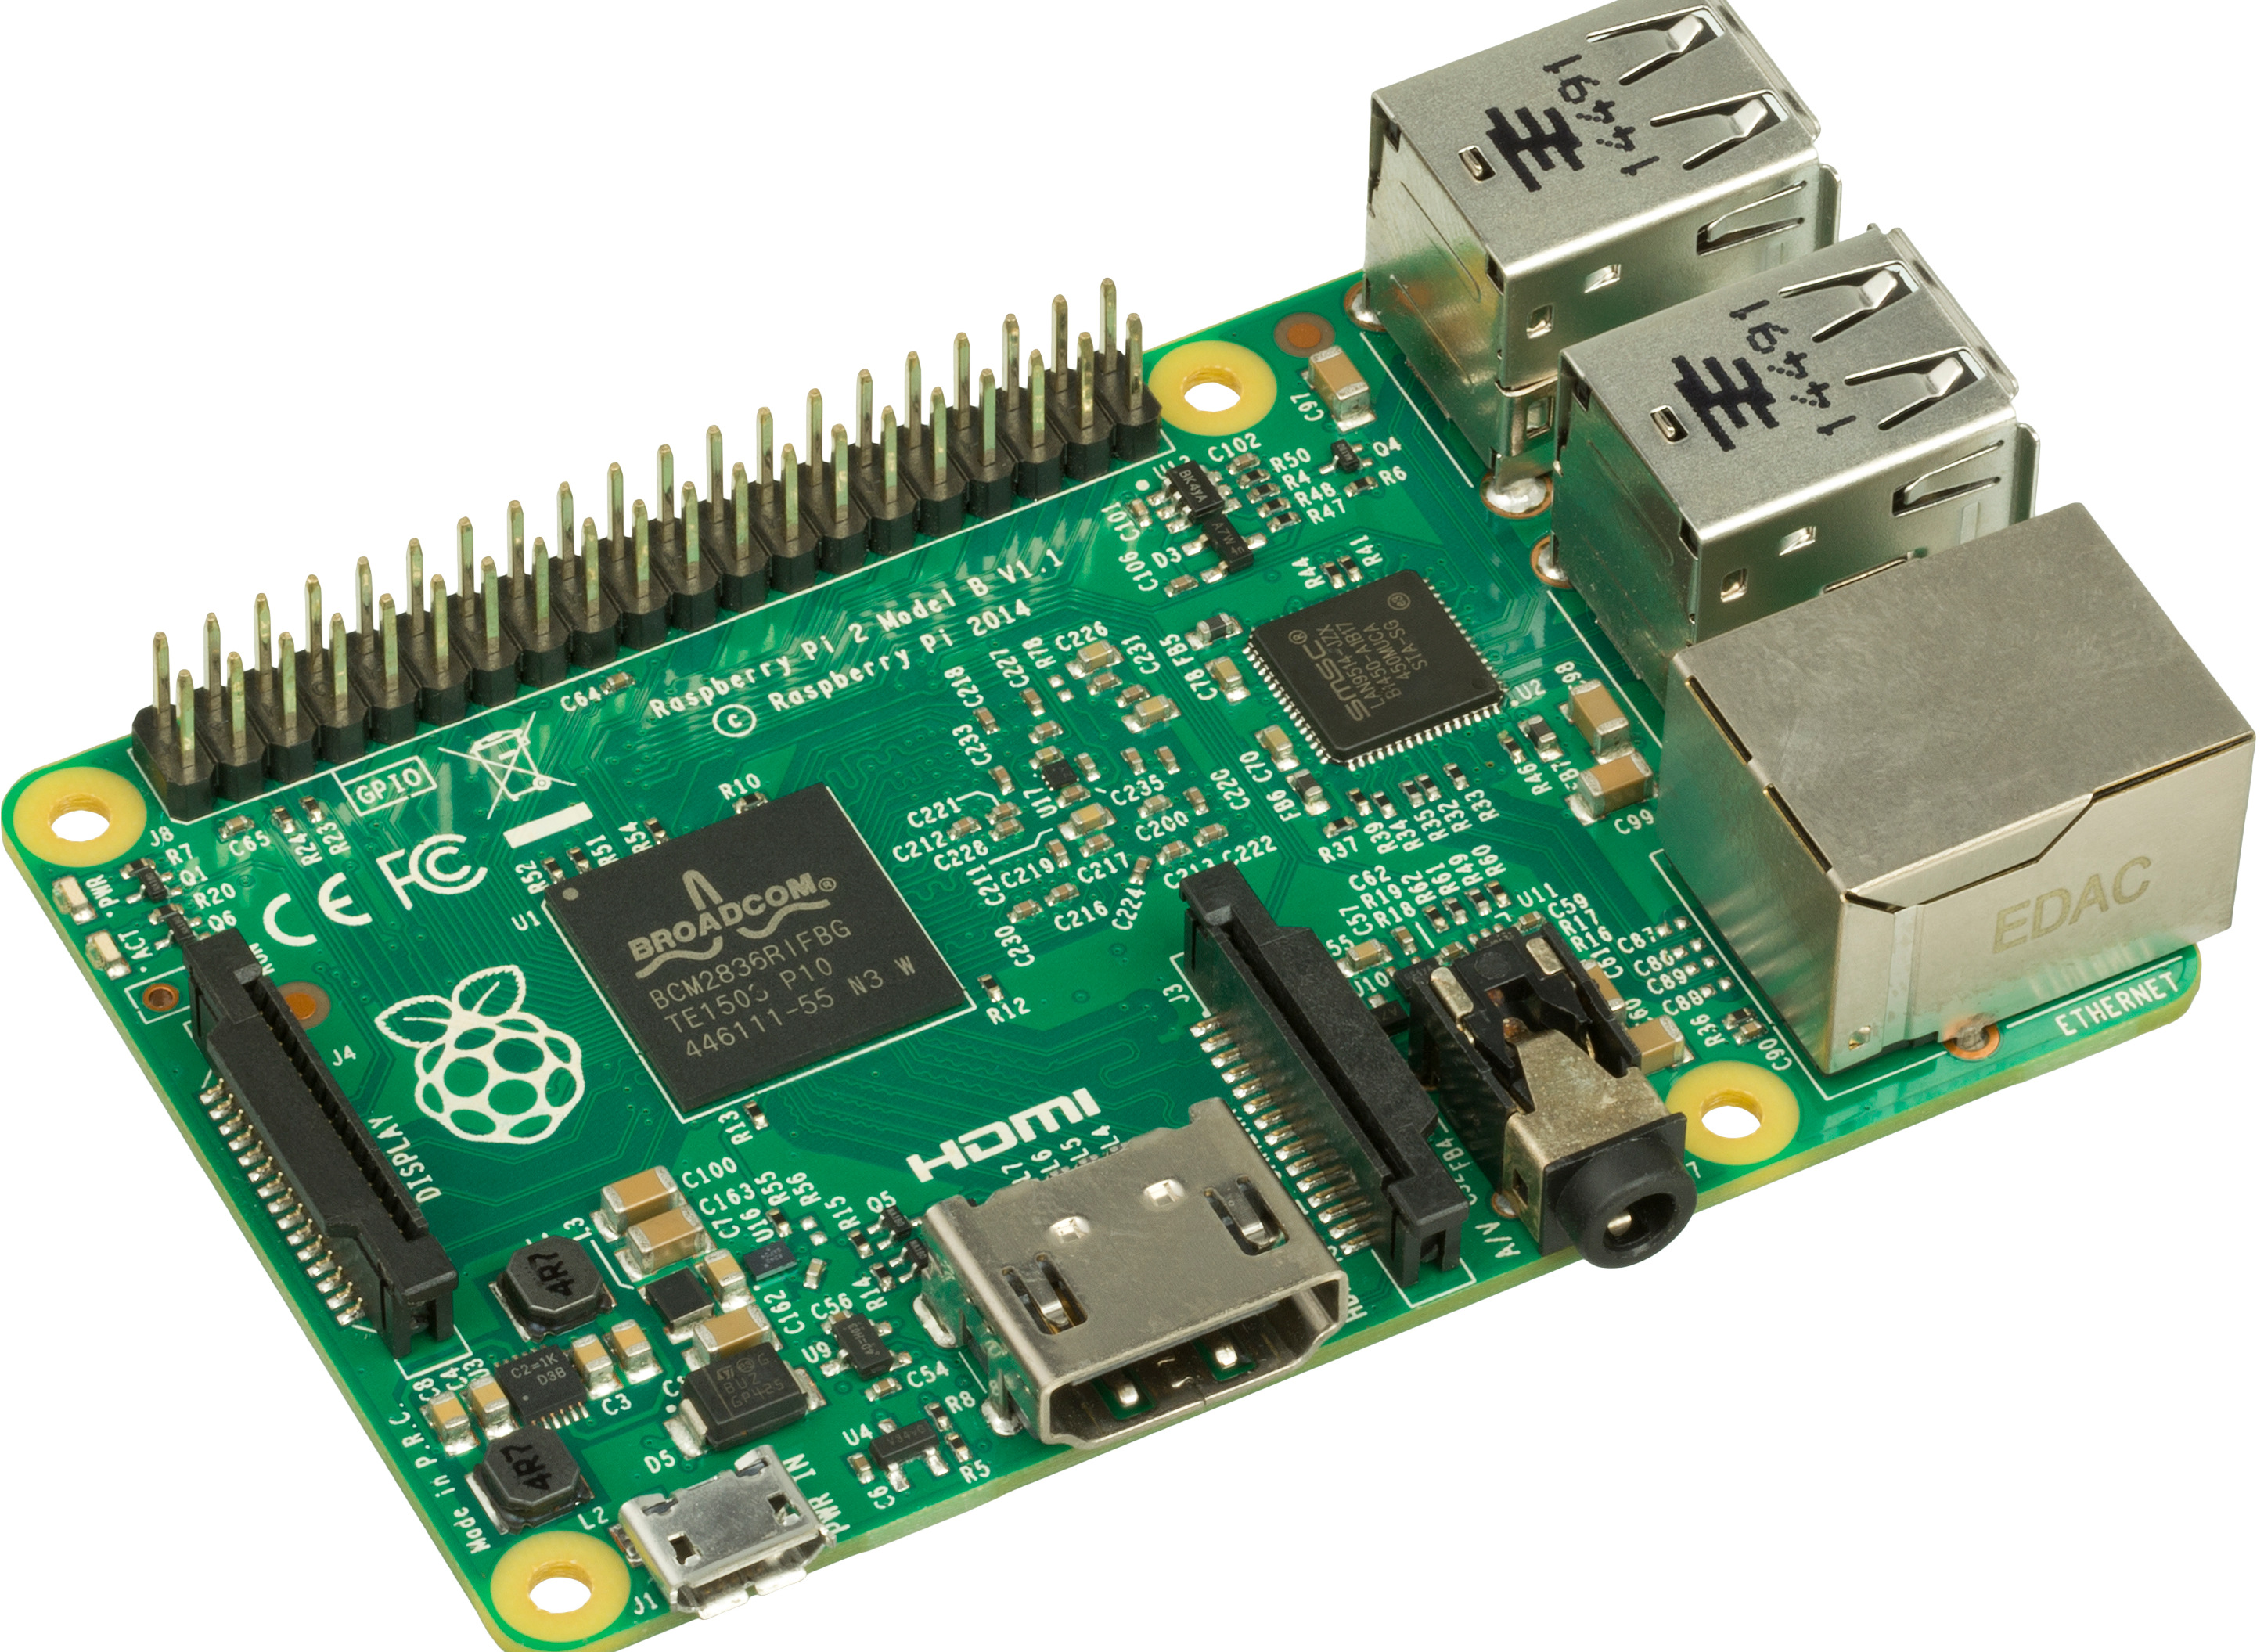 A photo of a Raspberry Pi 2B computer on a white background. 